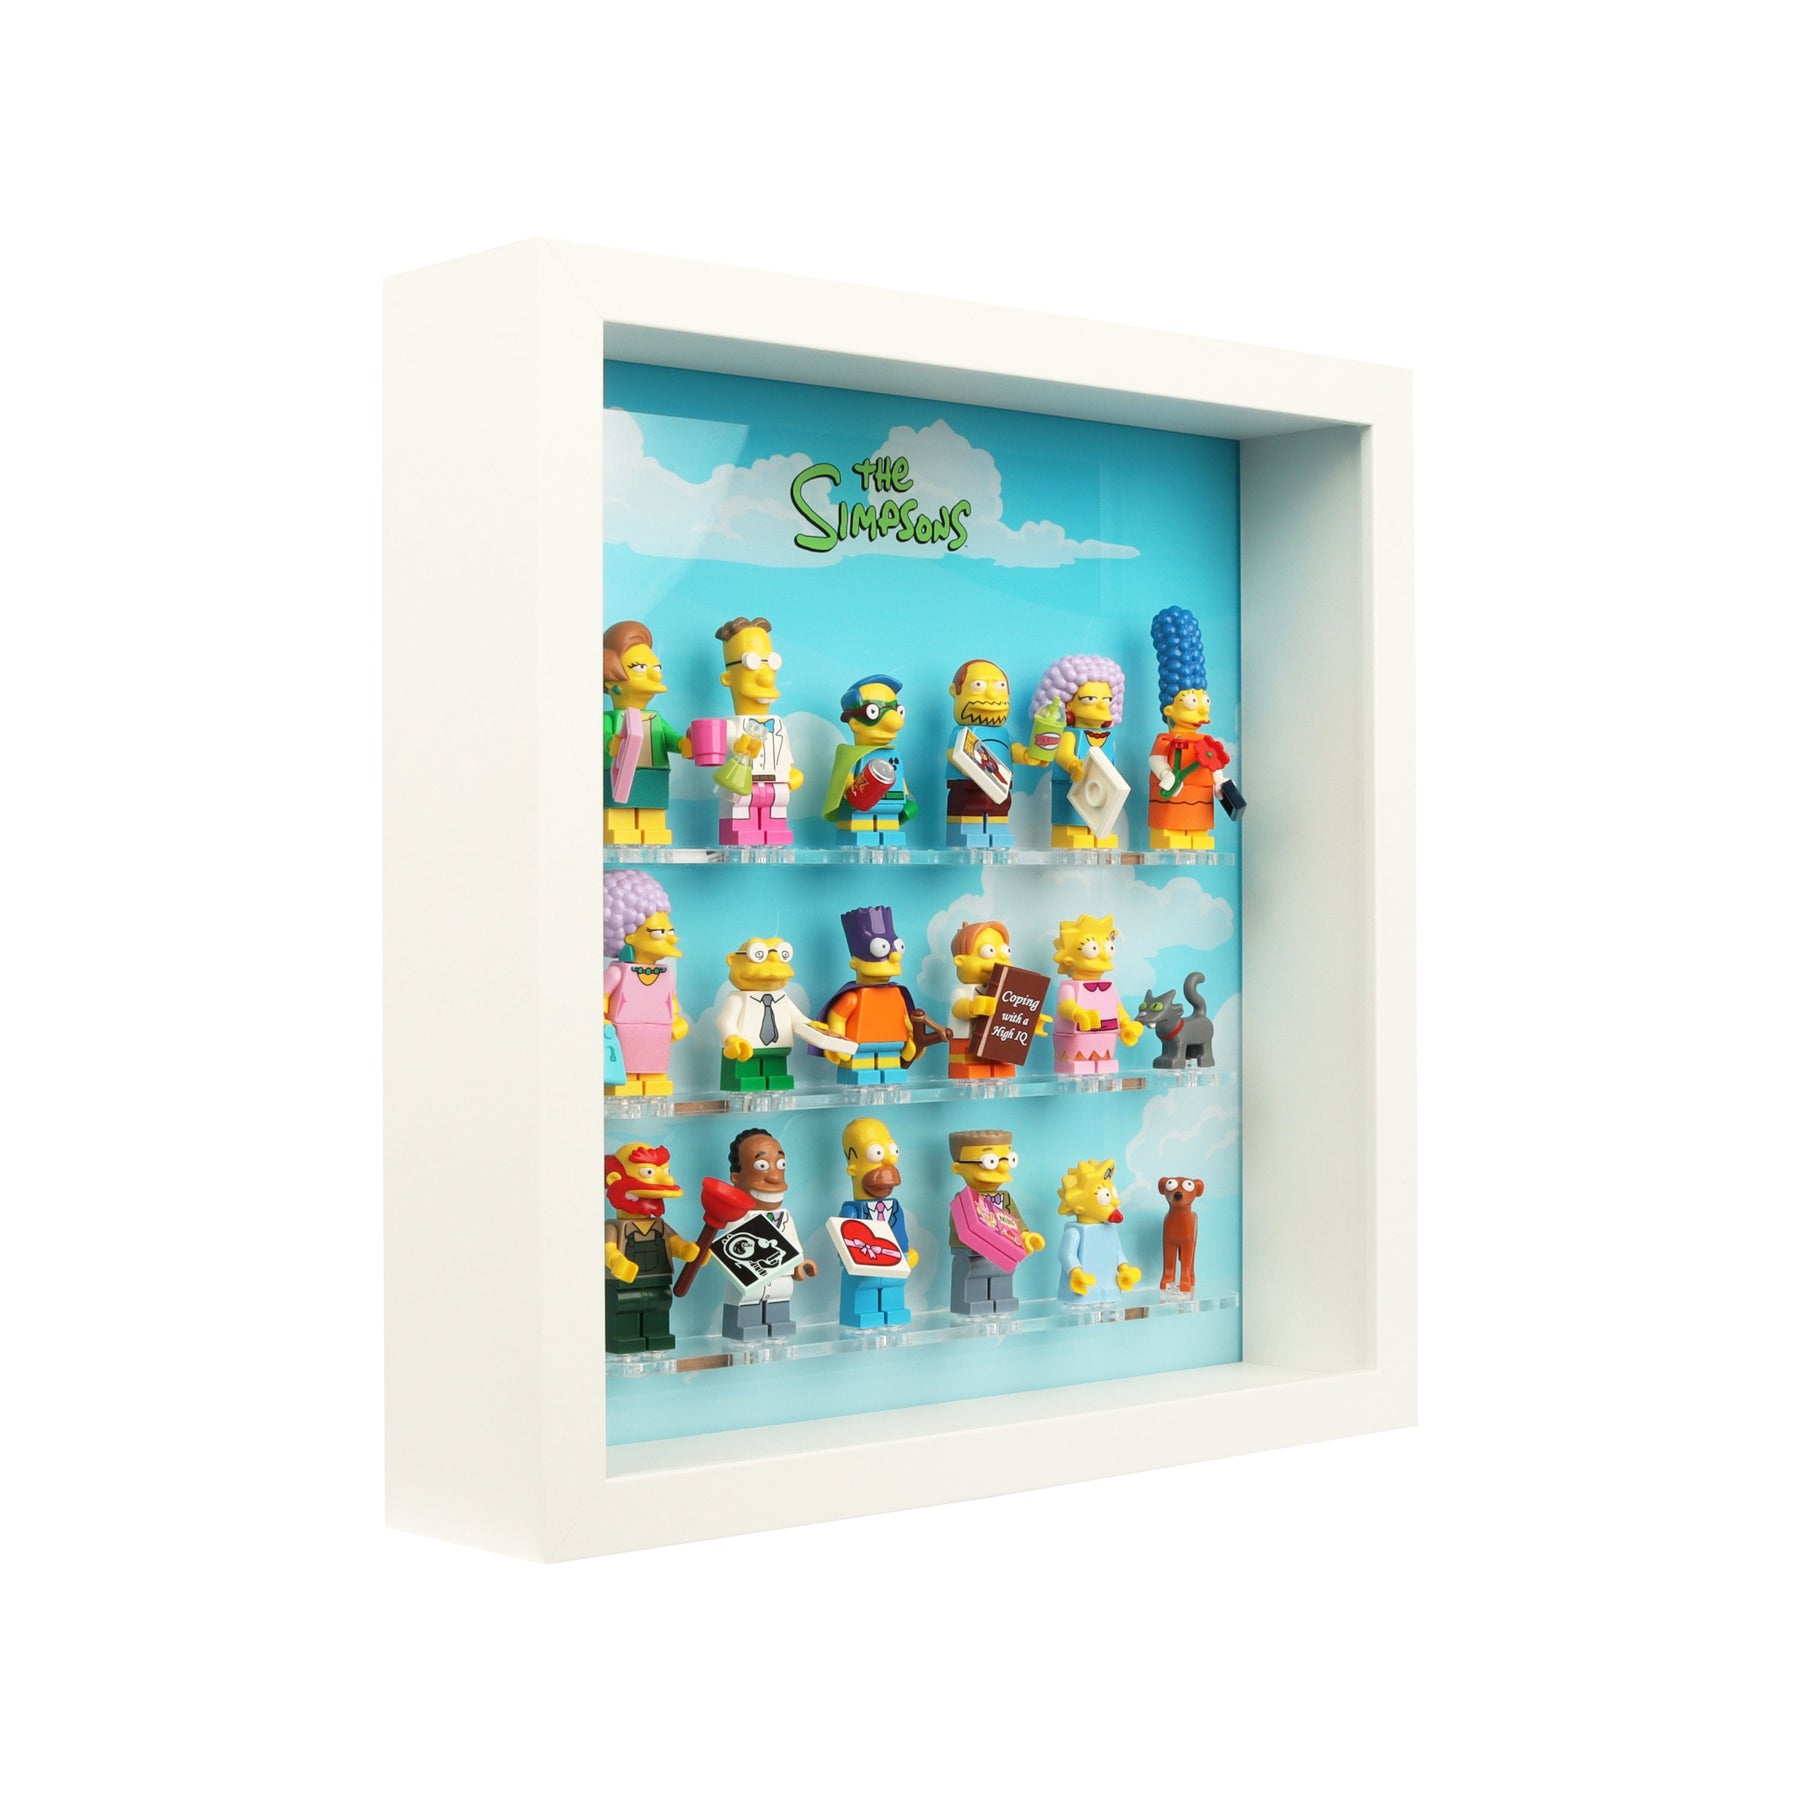 Lego 71009 Simpsons Series 2 Minifigure Display Case Insert for IKEA SANNAHED Frame (25x25cm)